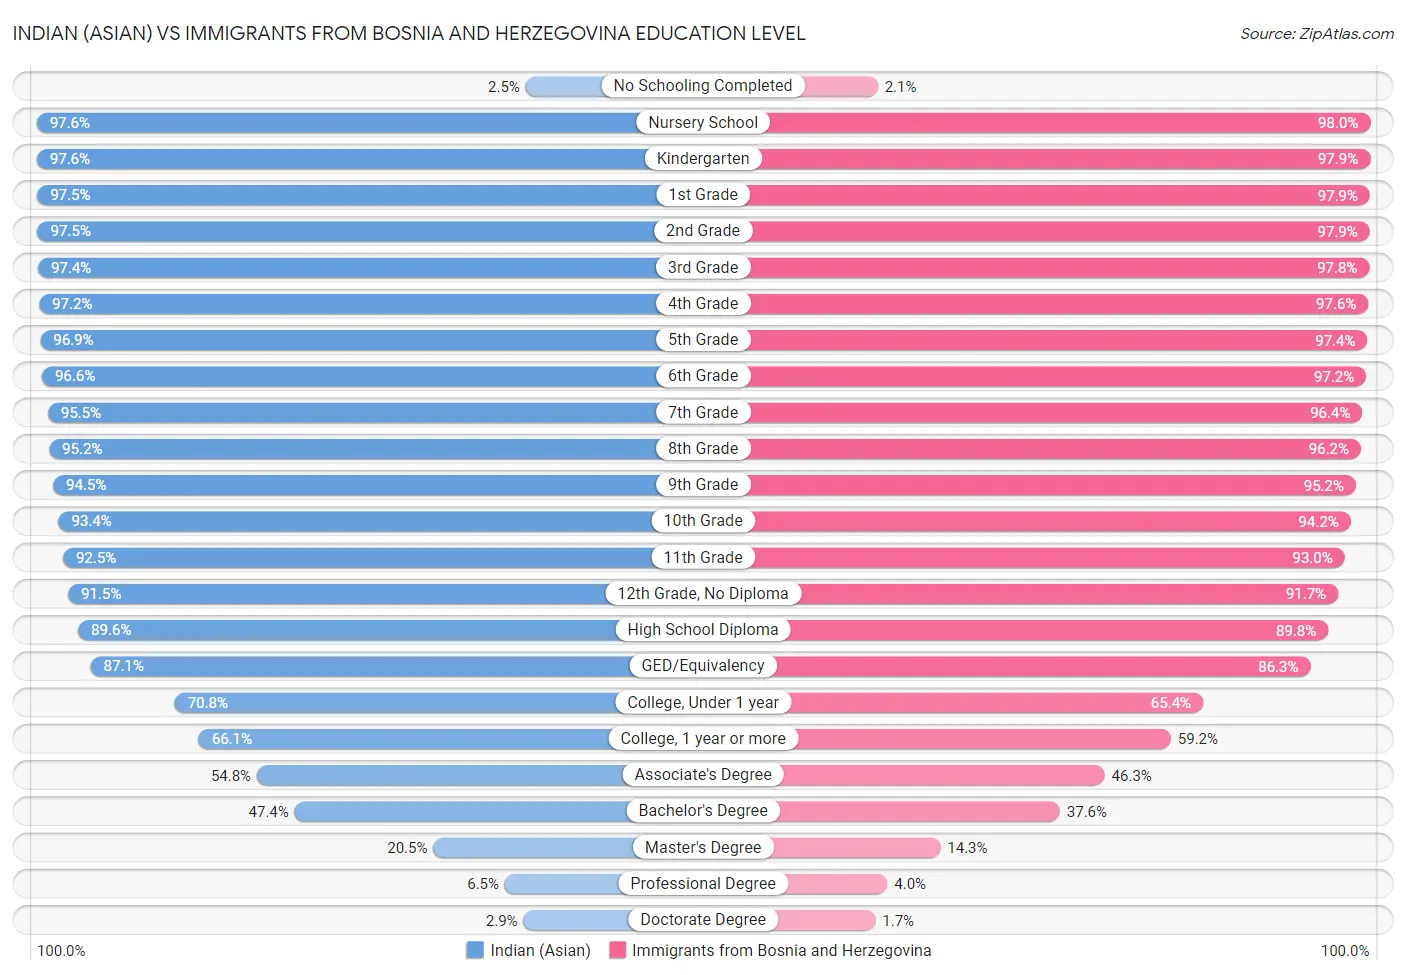 Indian (Asian) vs Immigrants from Bosnia and Herzegovina Education Level